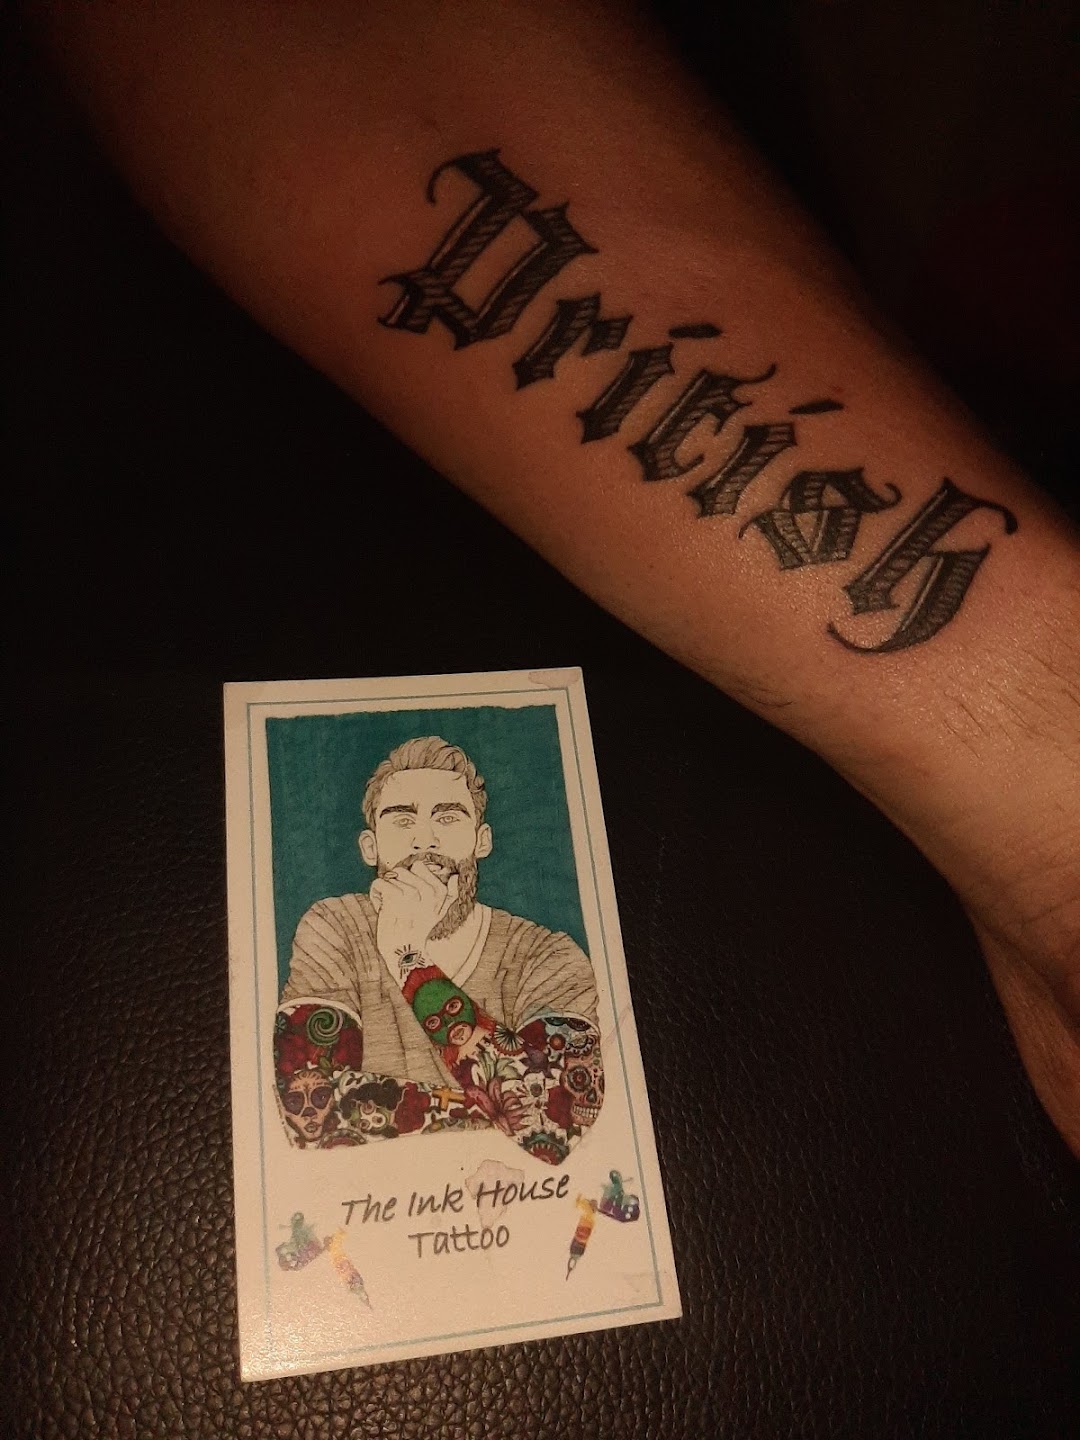 The ink house tattoo